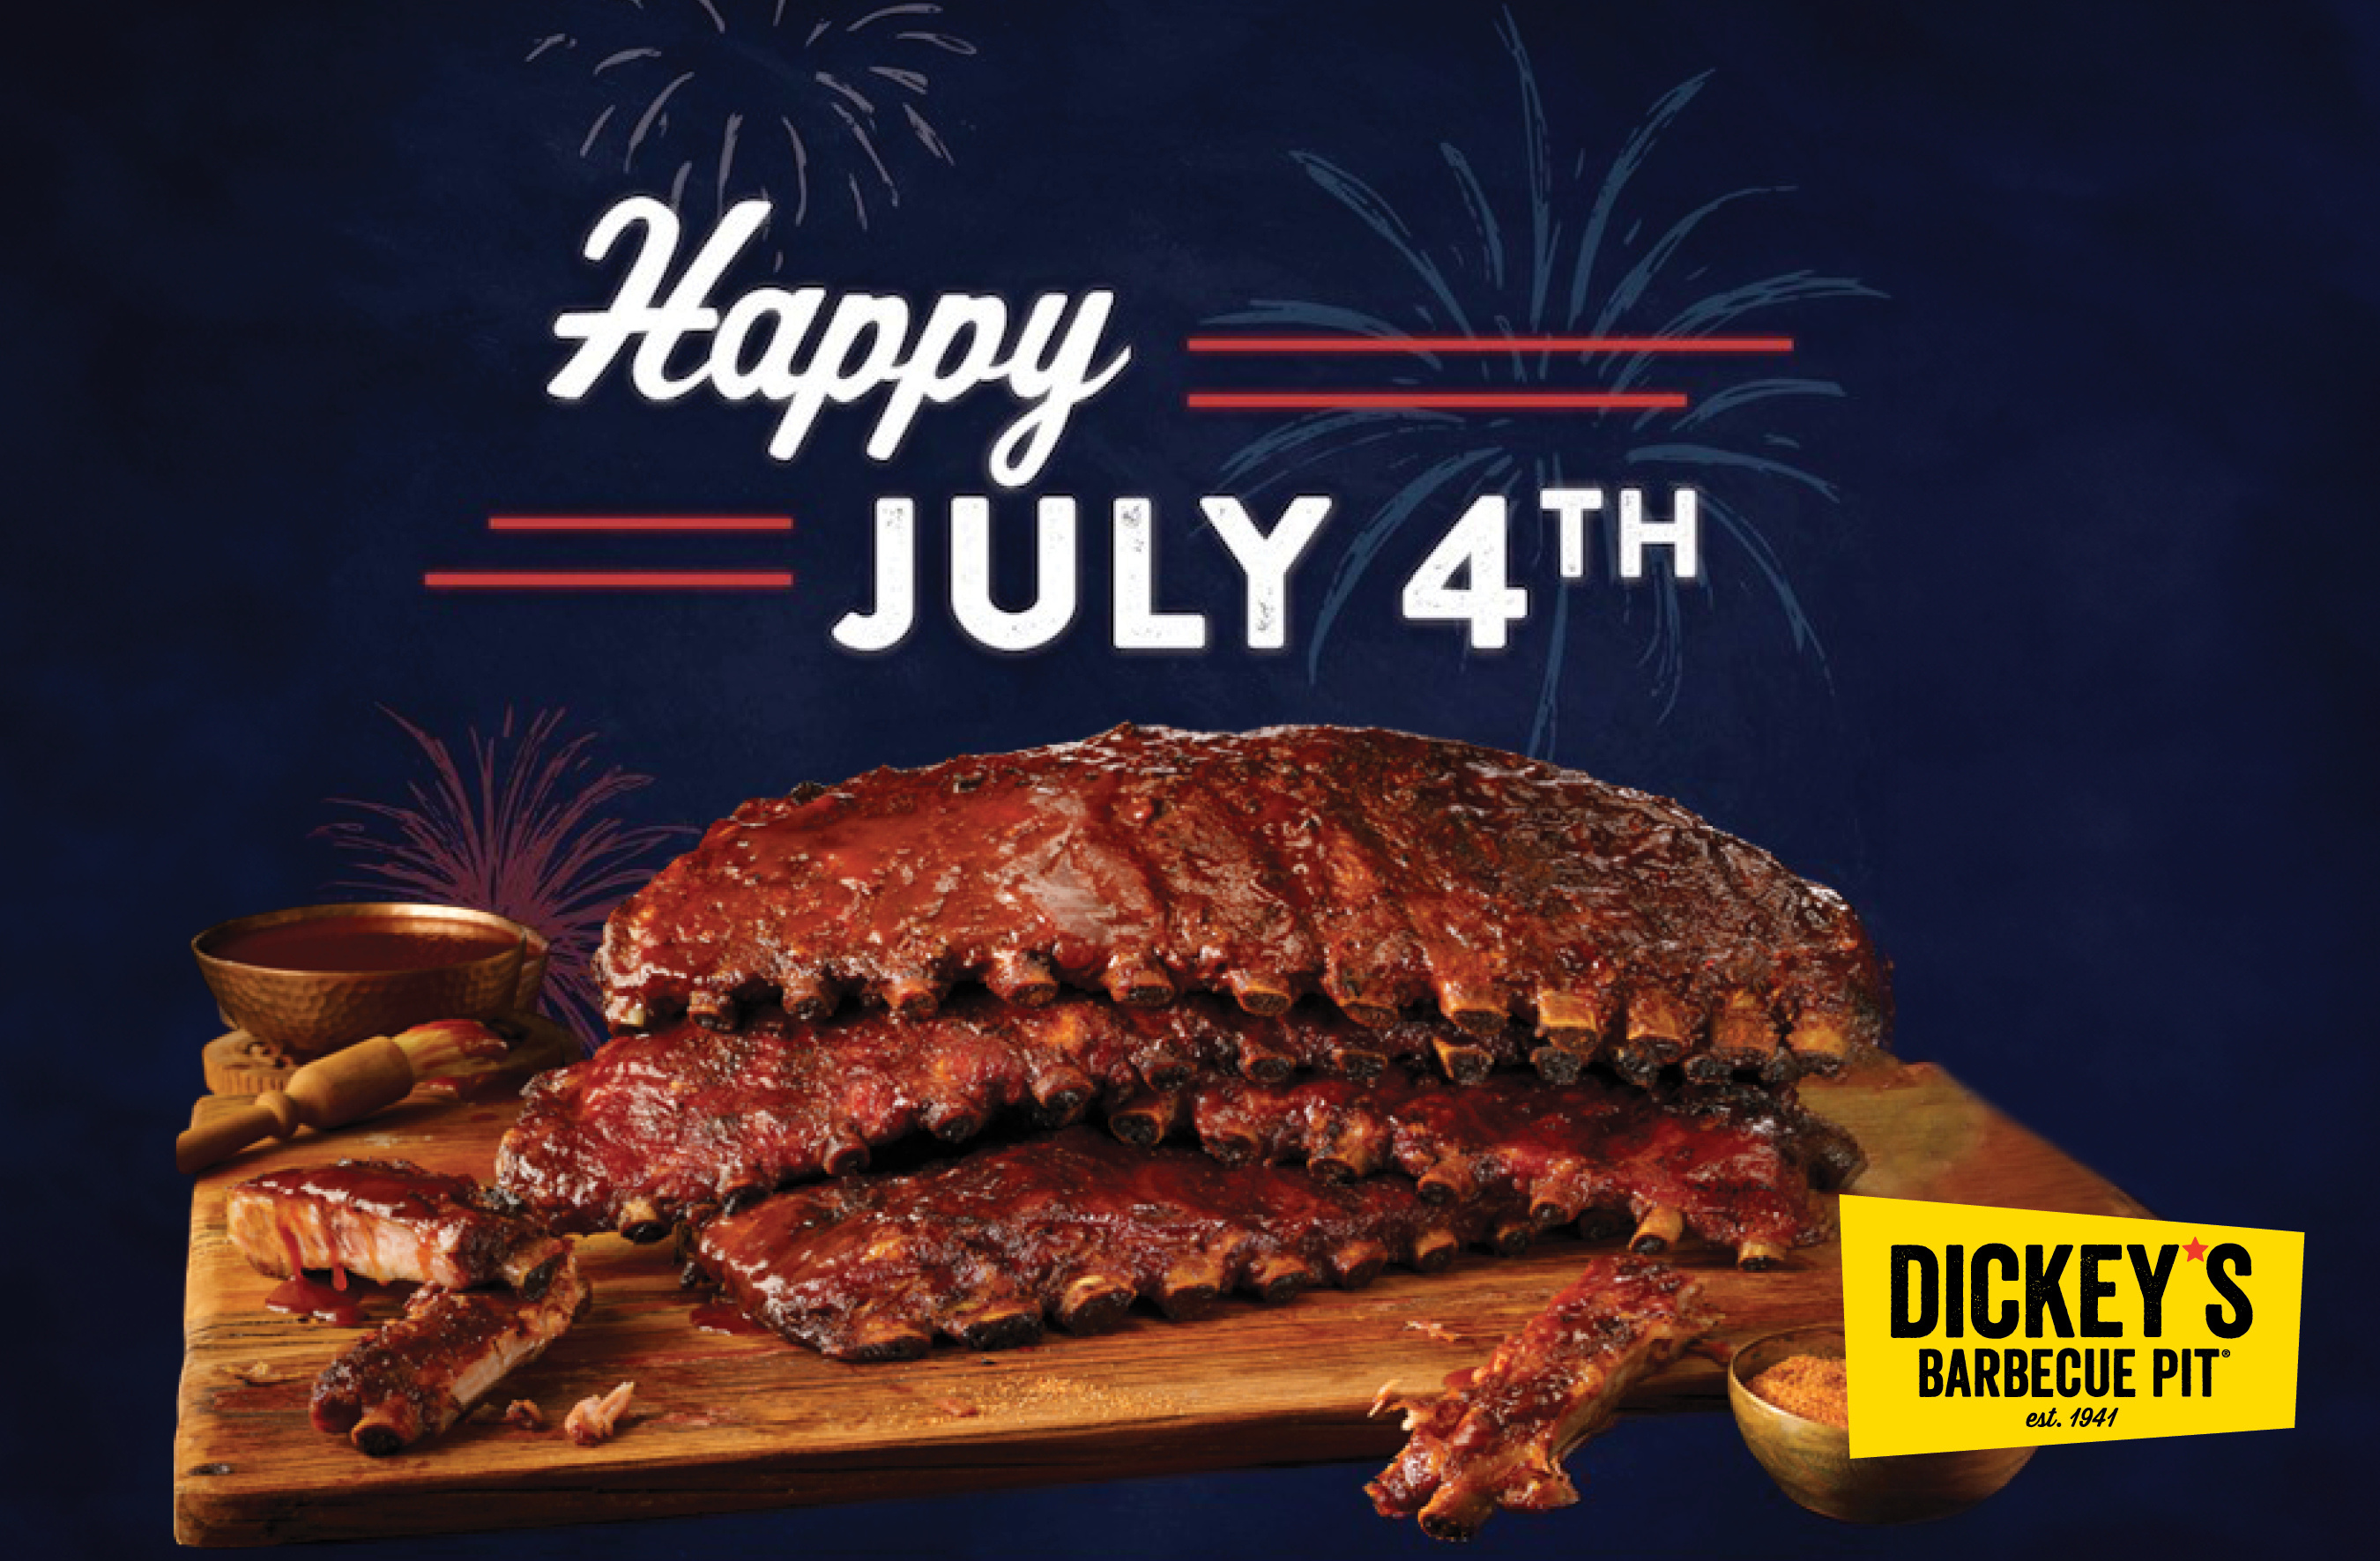 Celebrate with Dickey's Barbecue Pit Smokin' meats